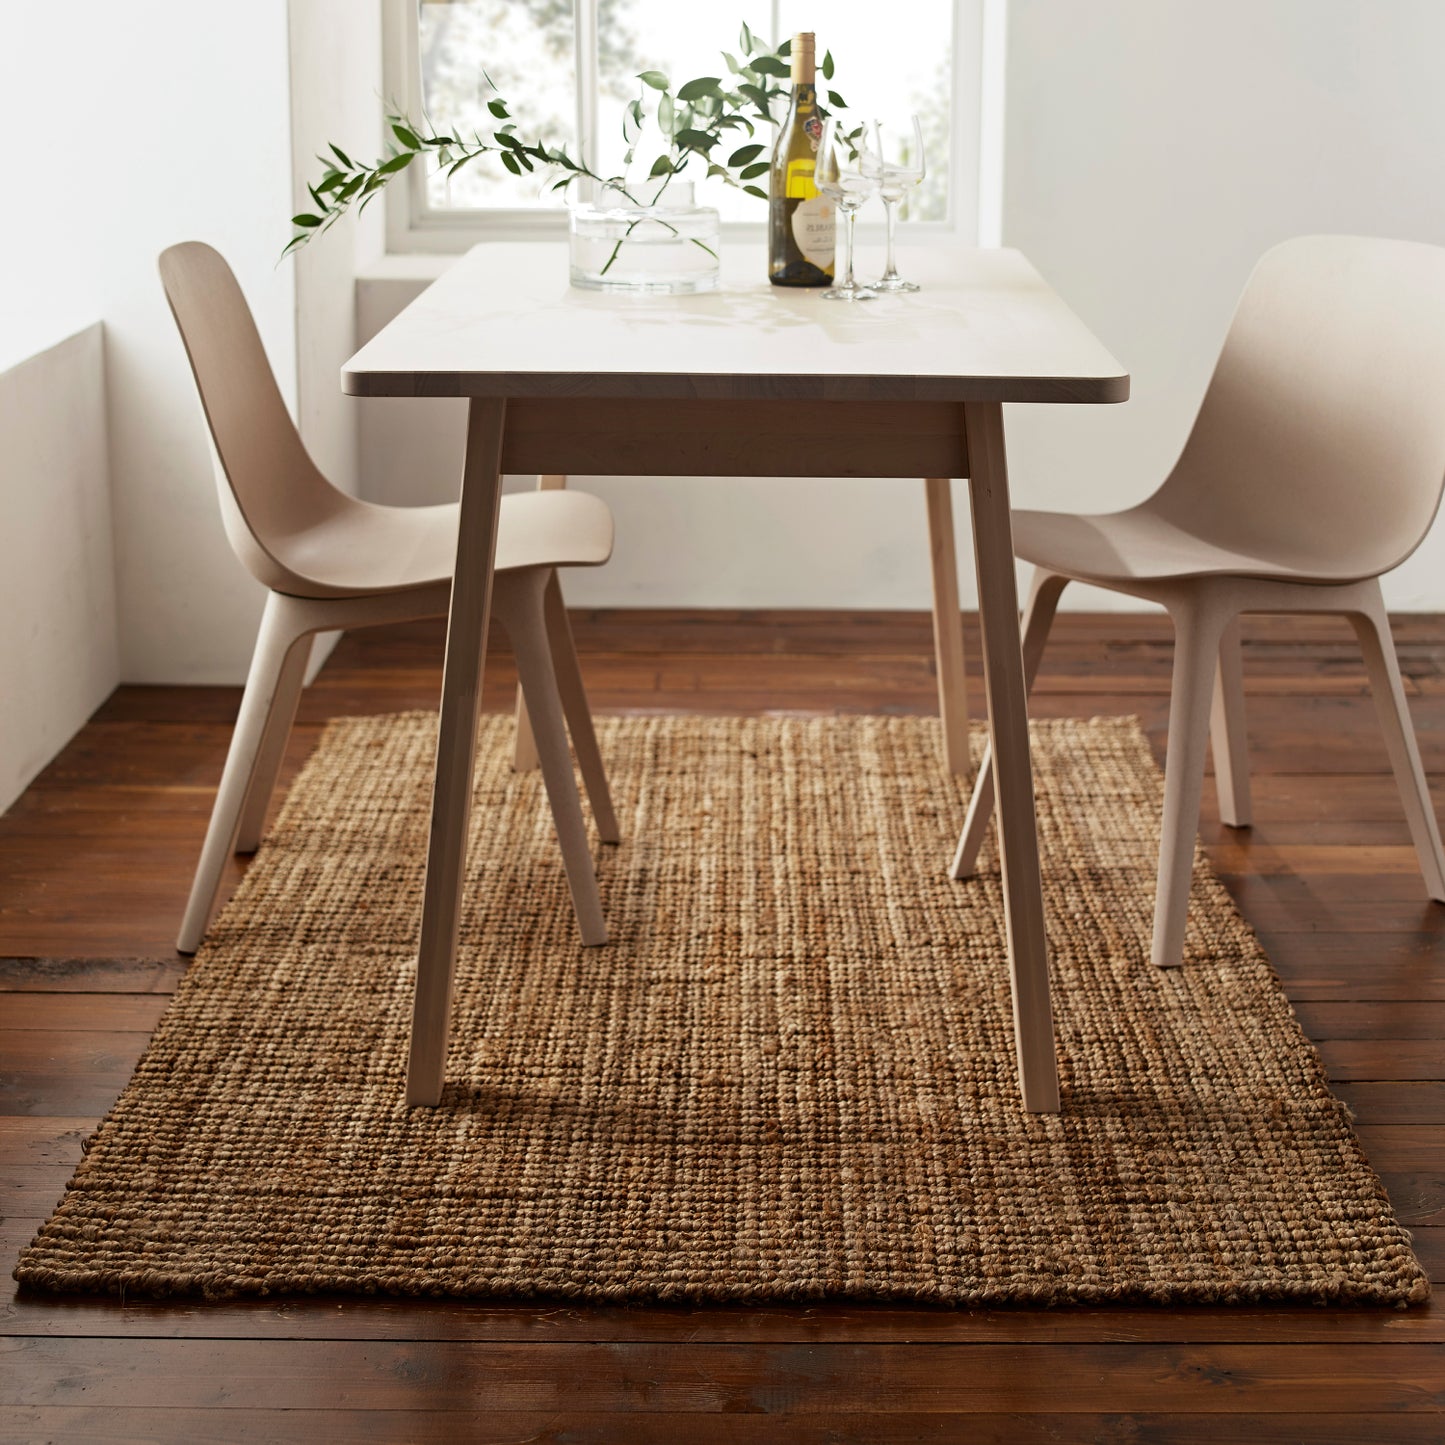 Cumbria thick chunky jute rug by Native